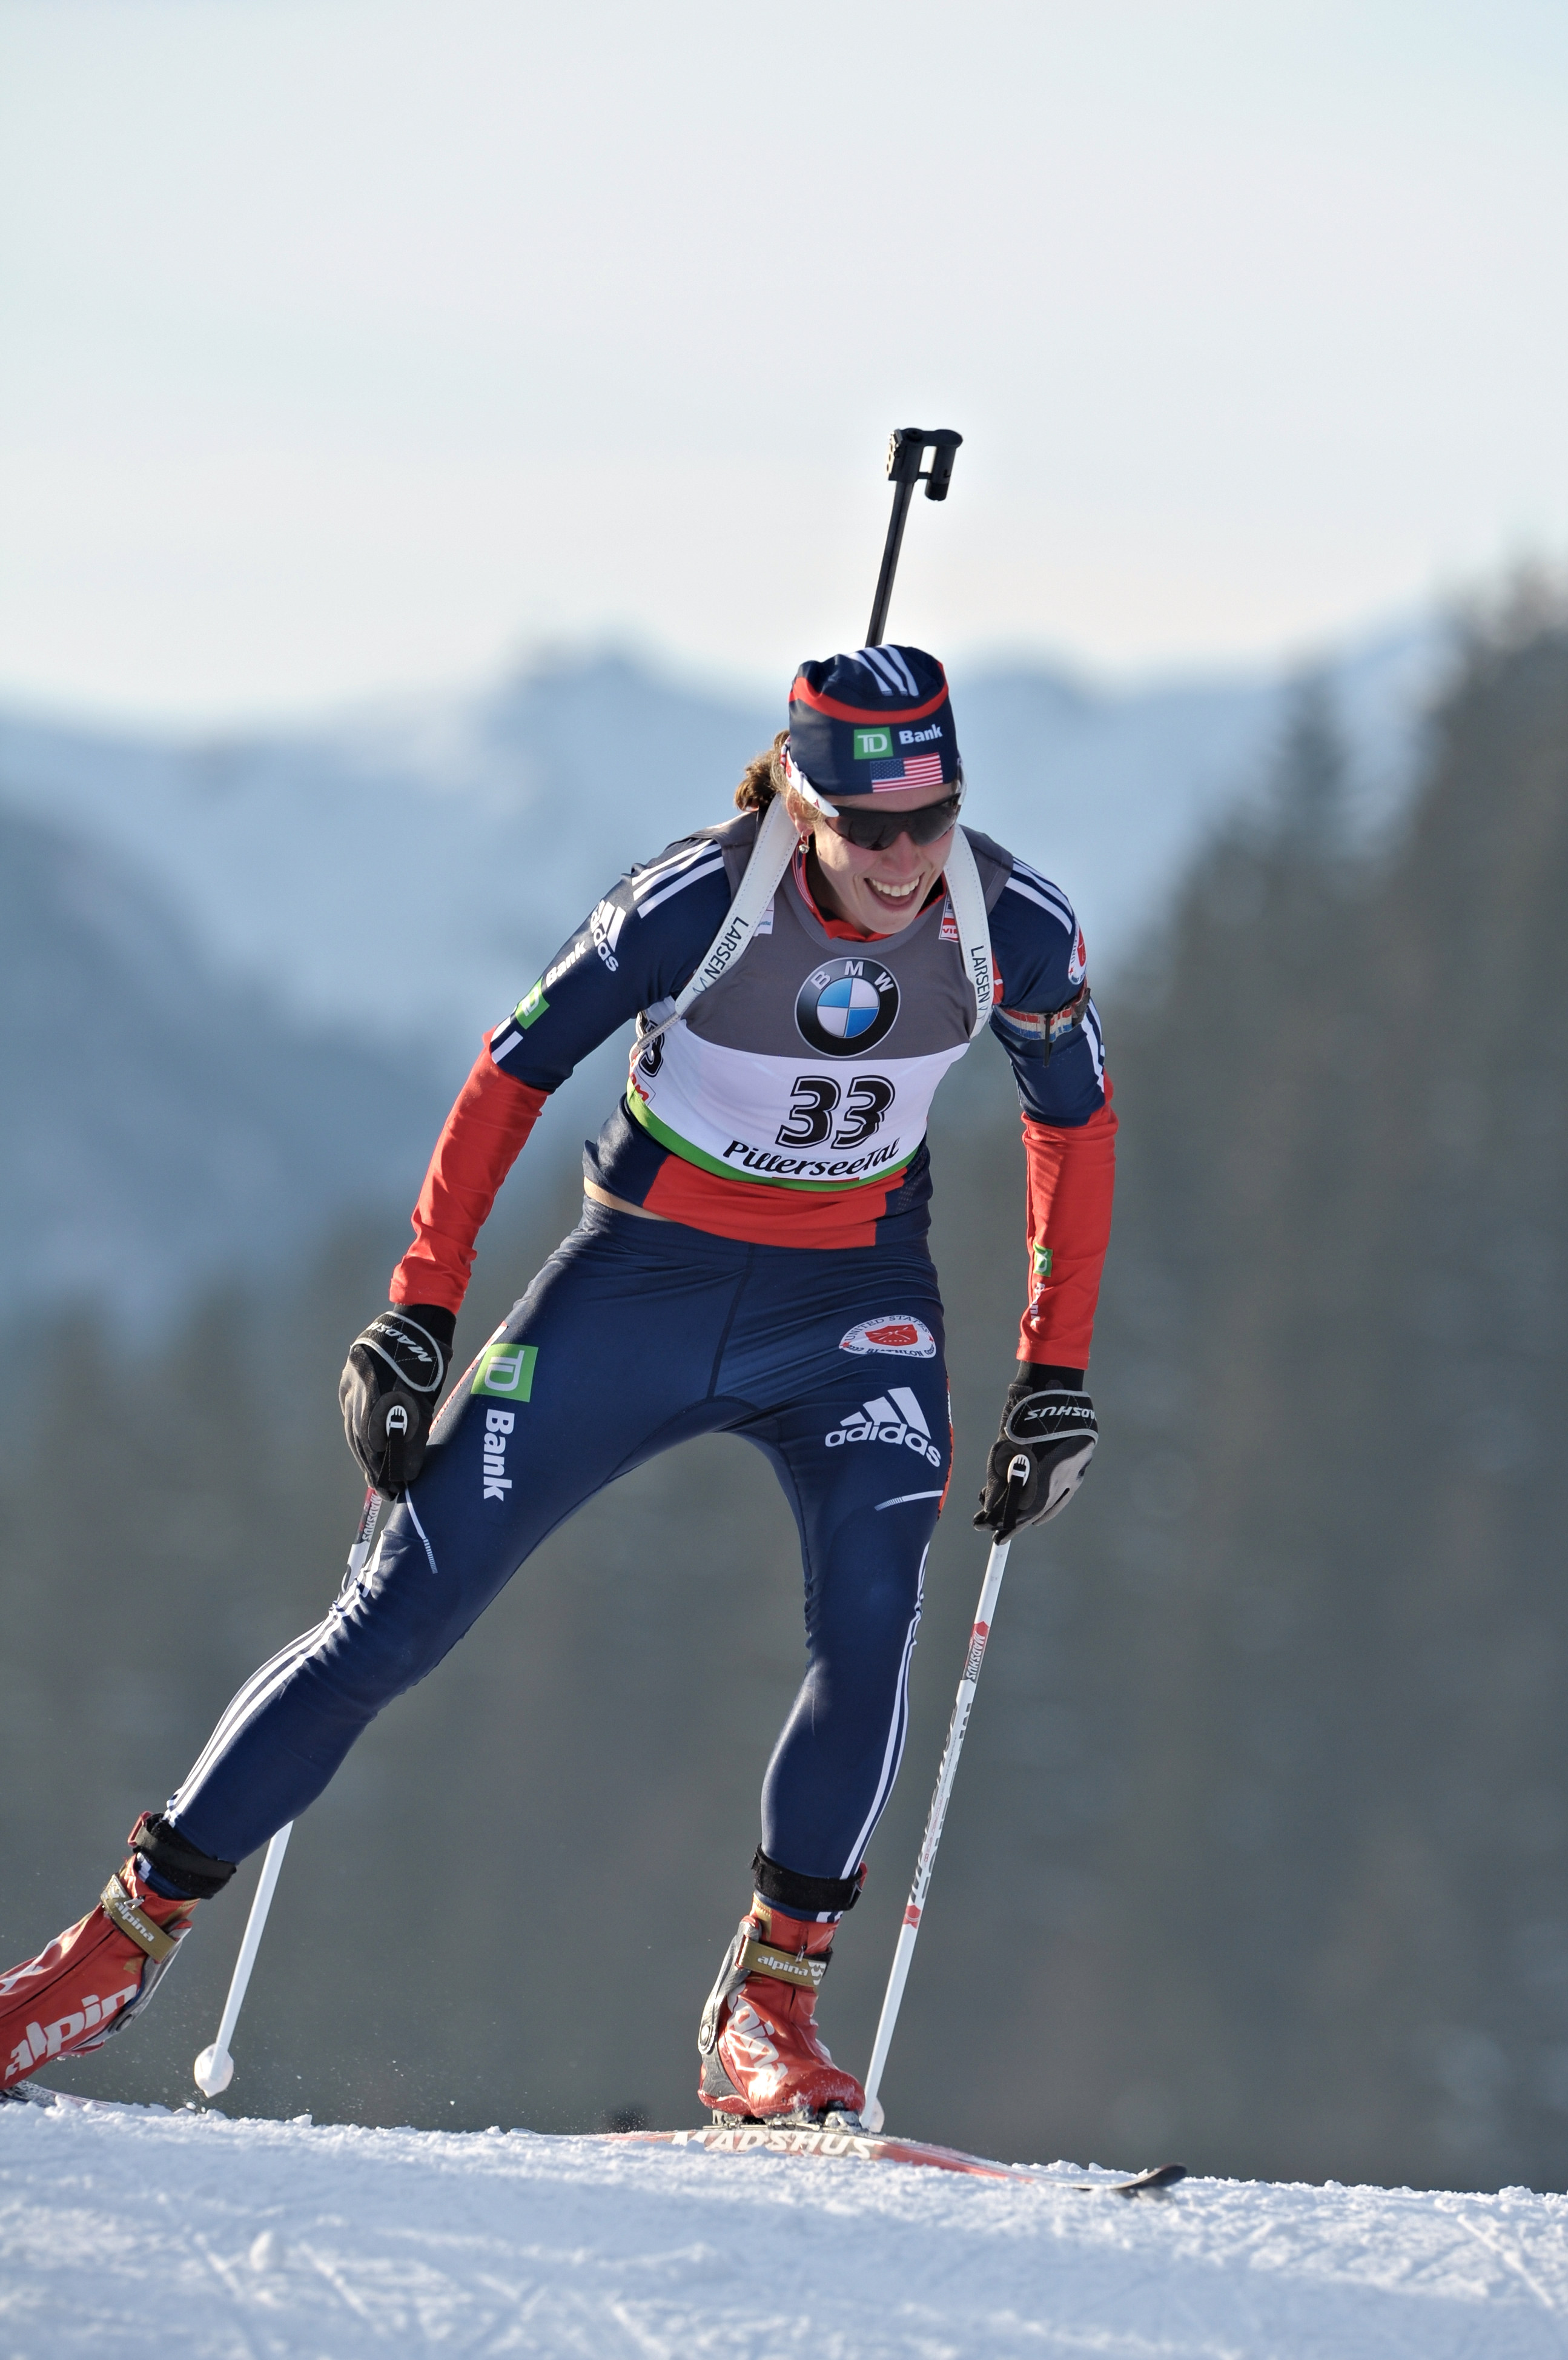 Kocher Improves to 23rd in Biathlon Pursuit; Dunklee, Studebaker 43rd and 44th for U.S.